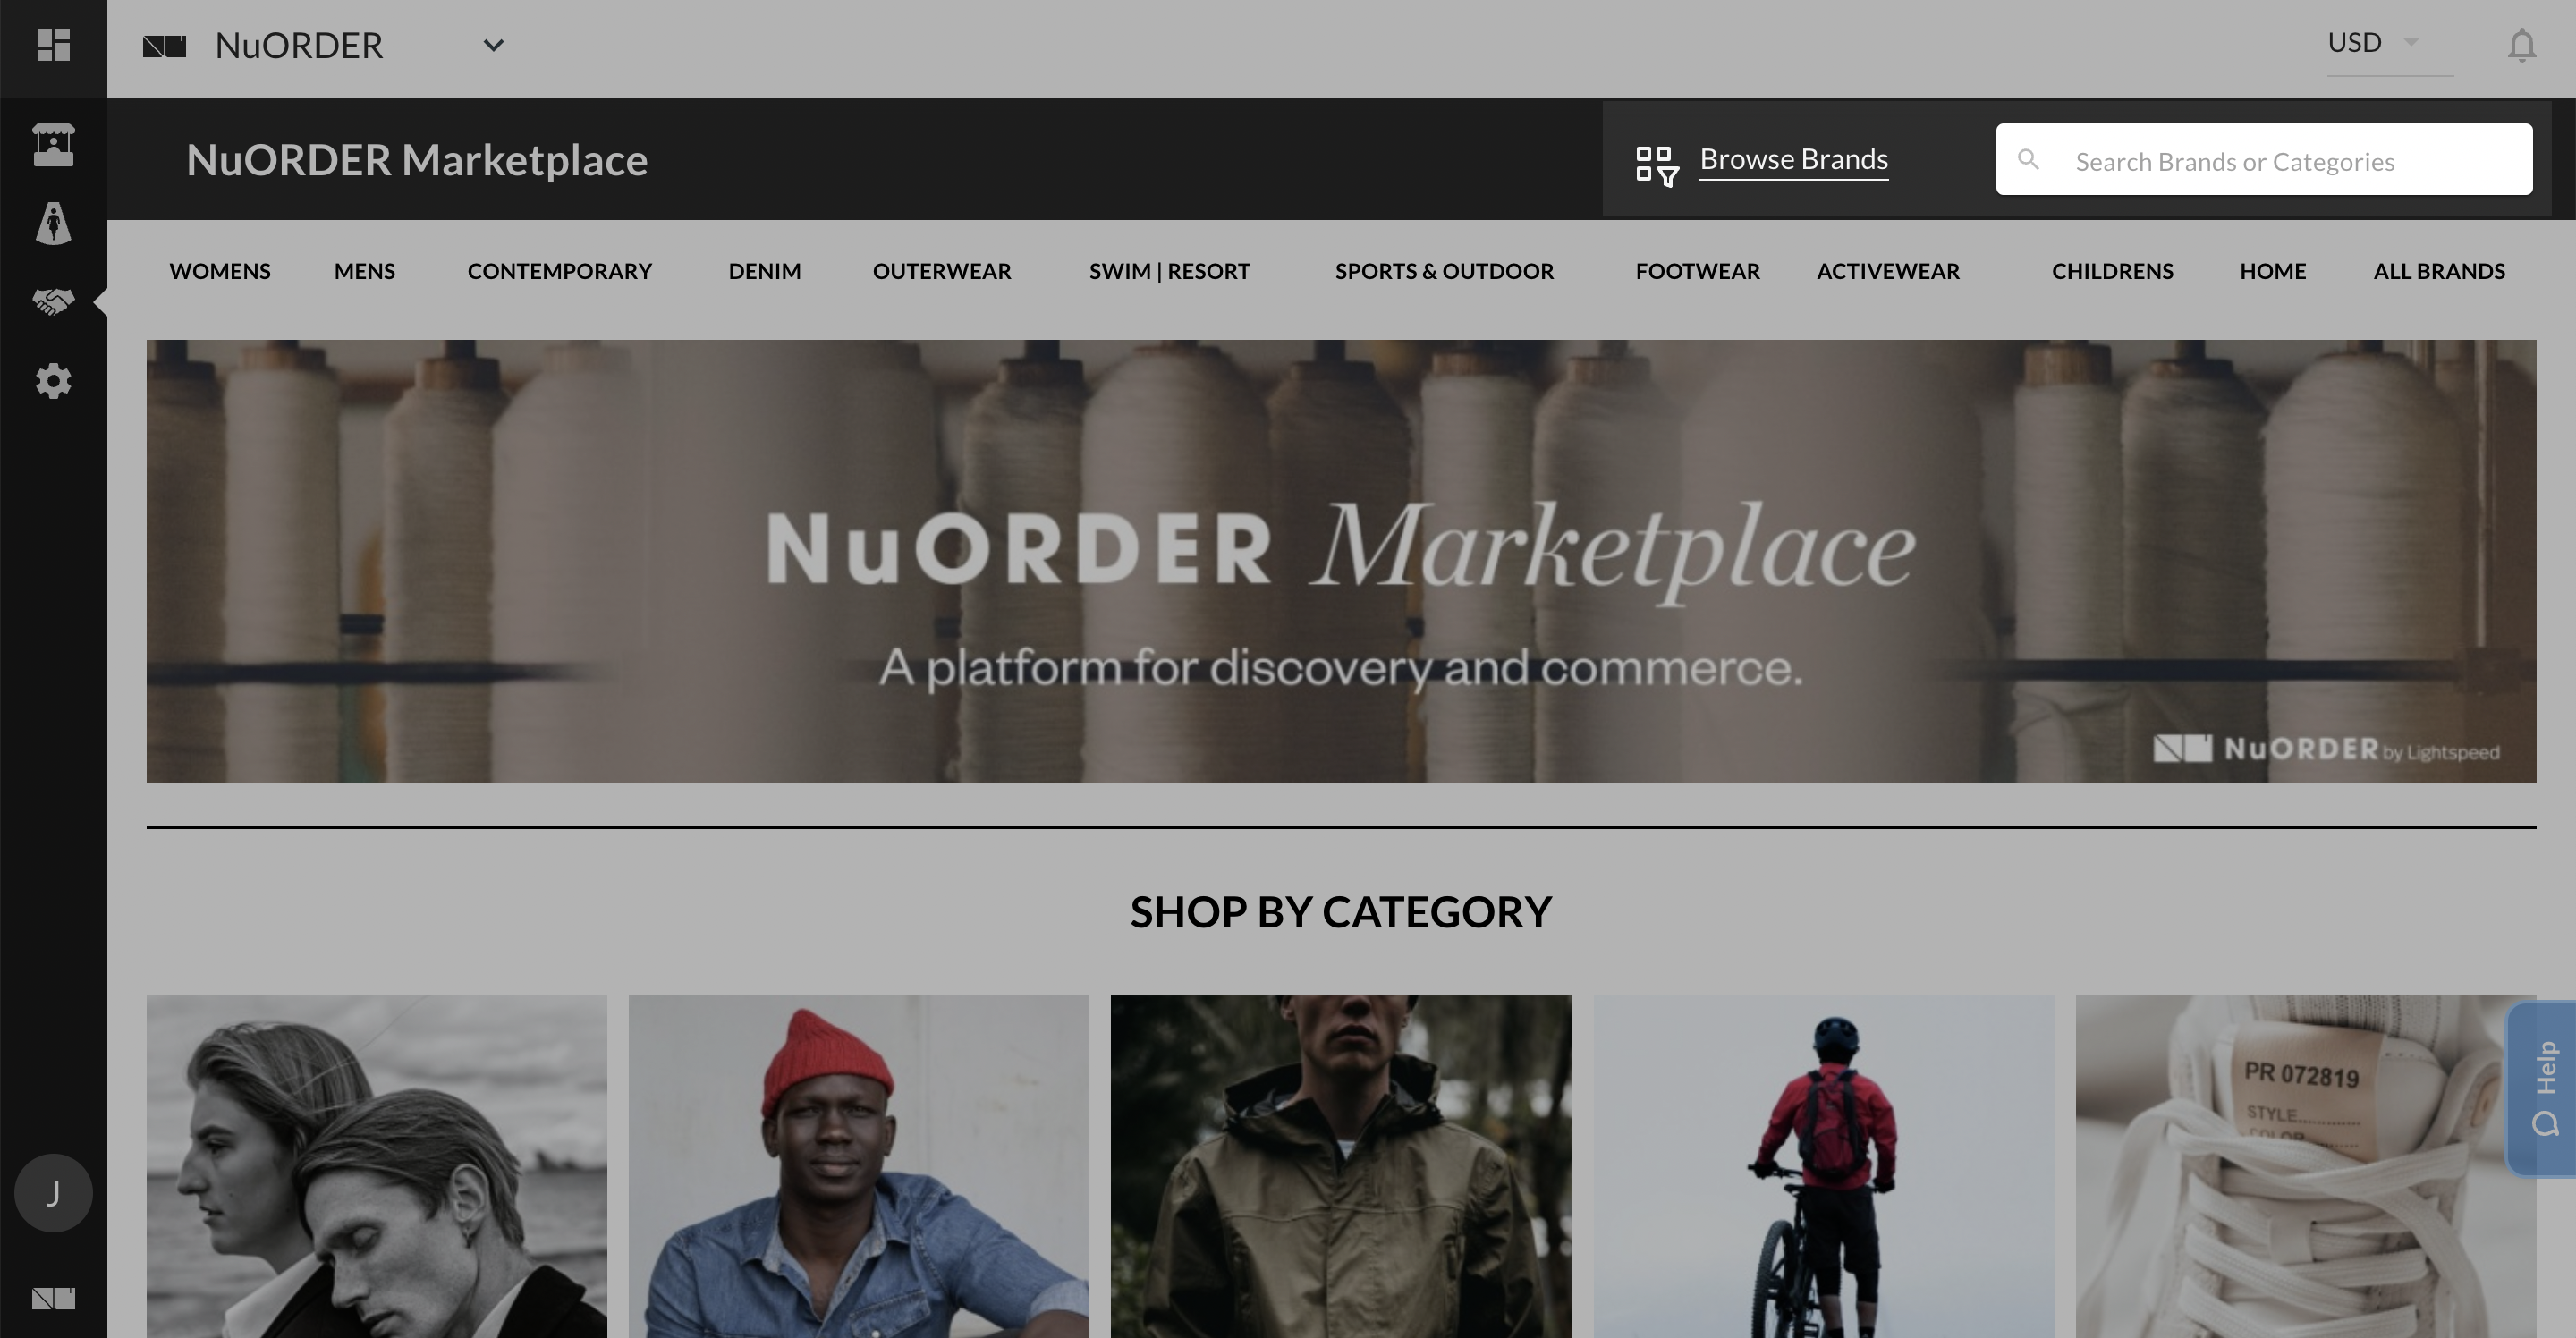 NuORDER-Marketplace-Search-Browse.png